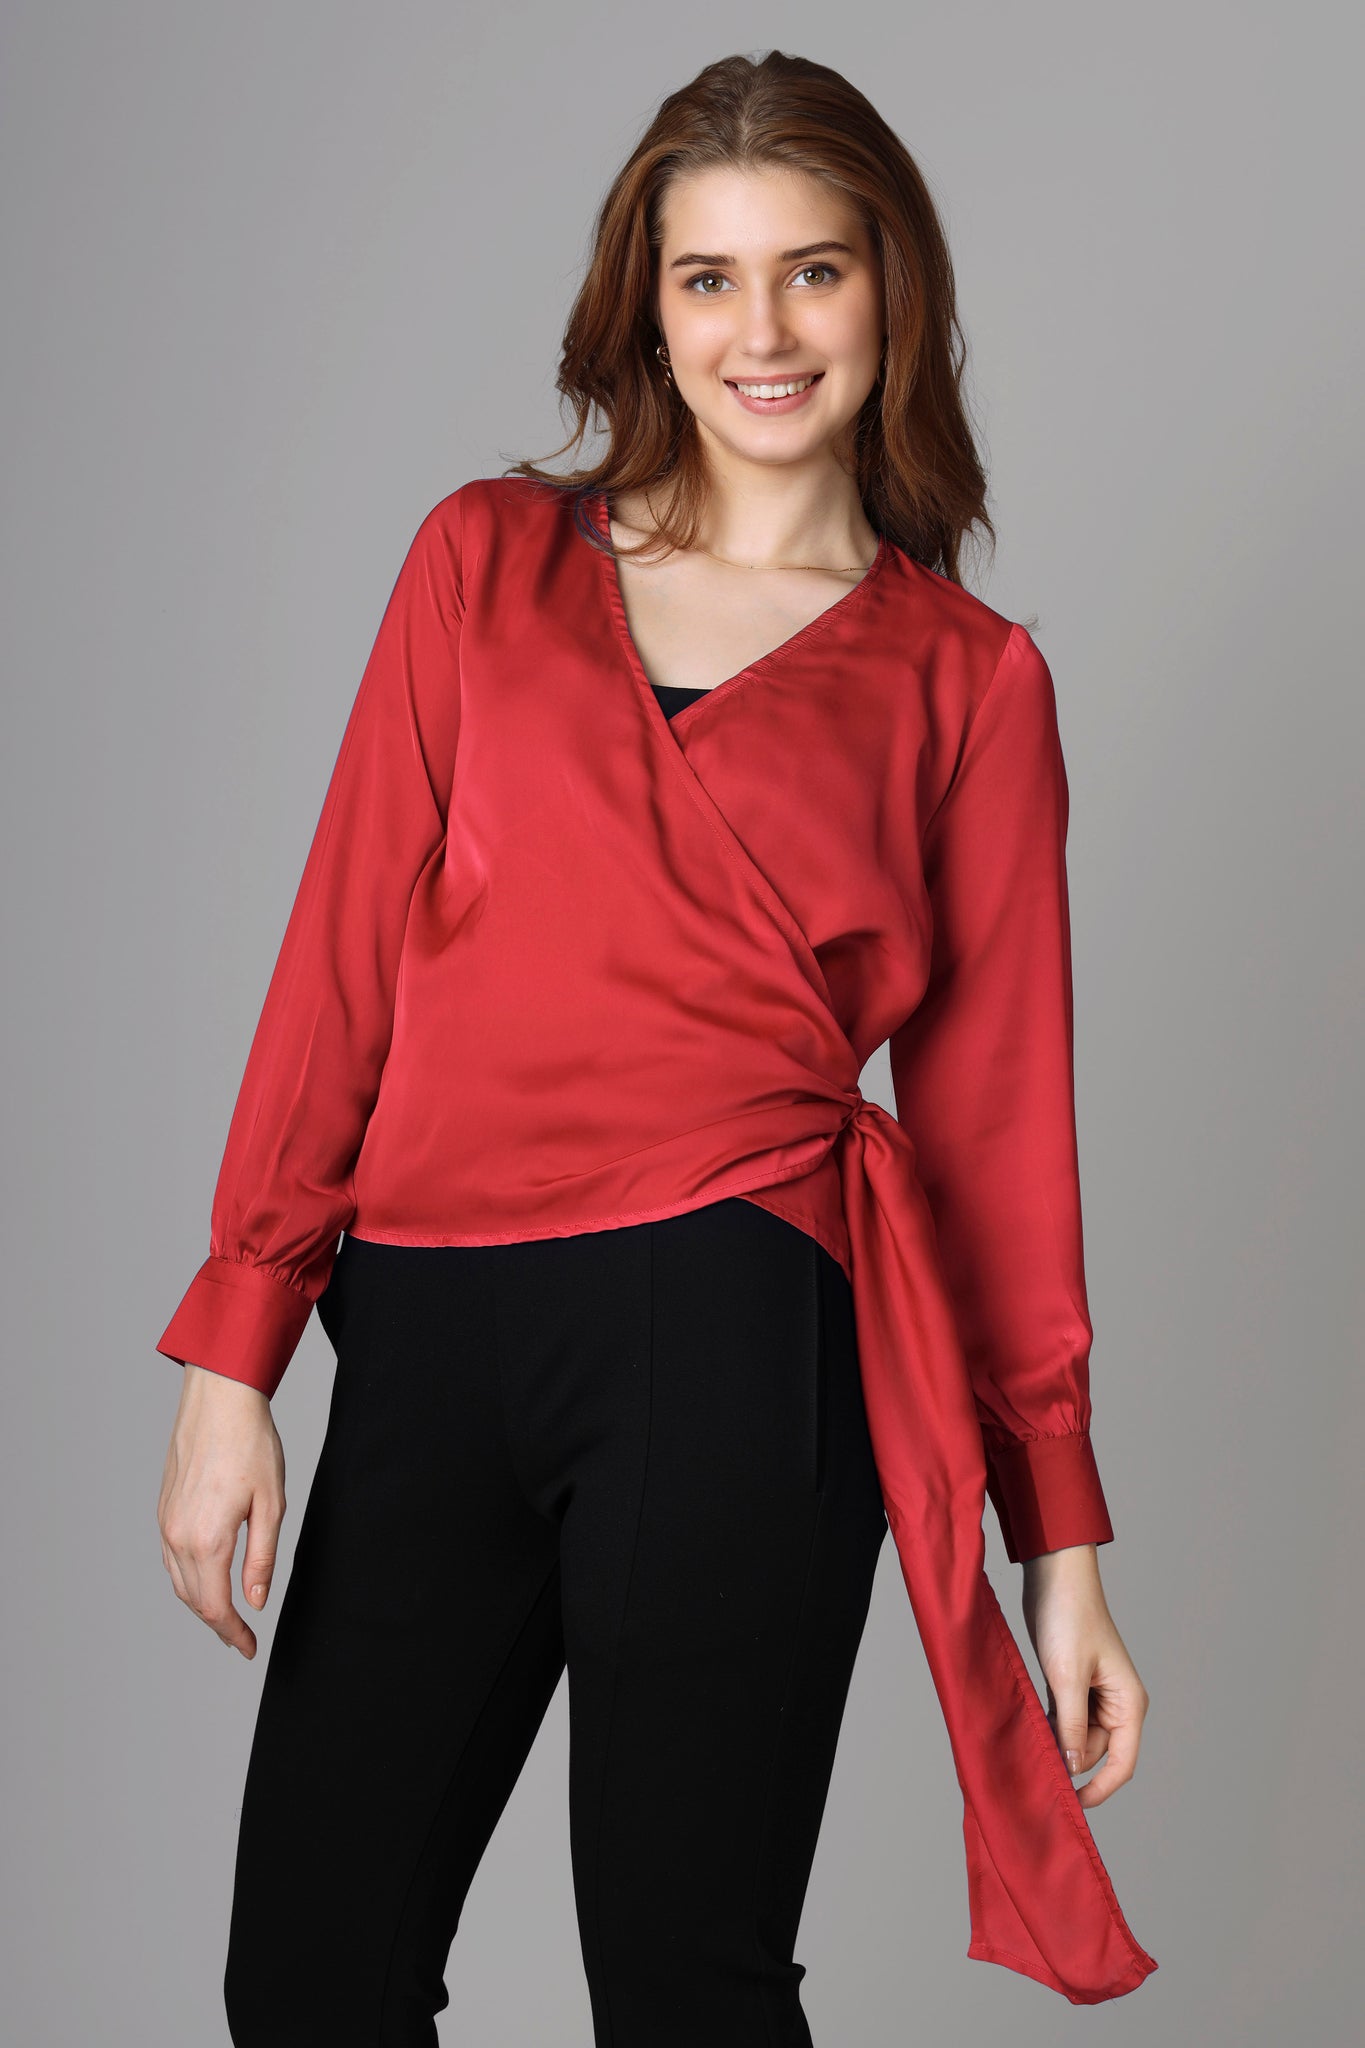 Classic Plain Red Top For Women